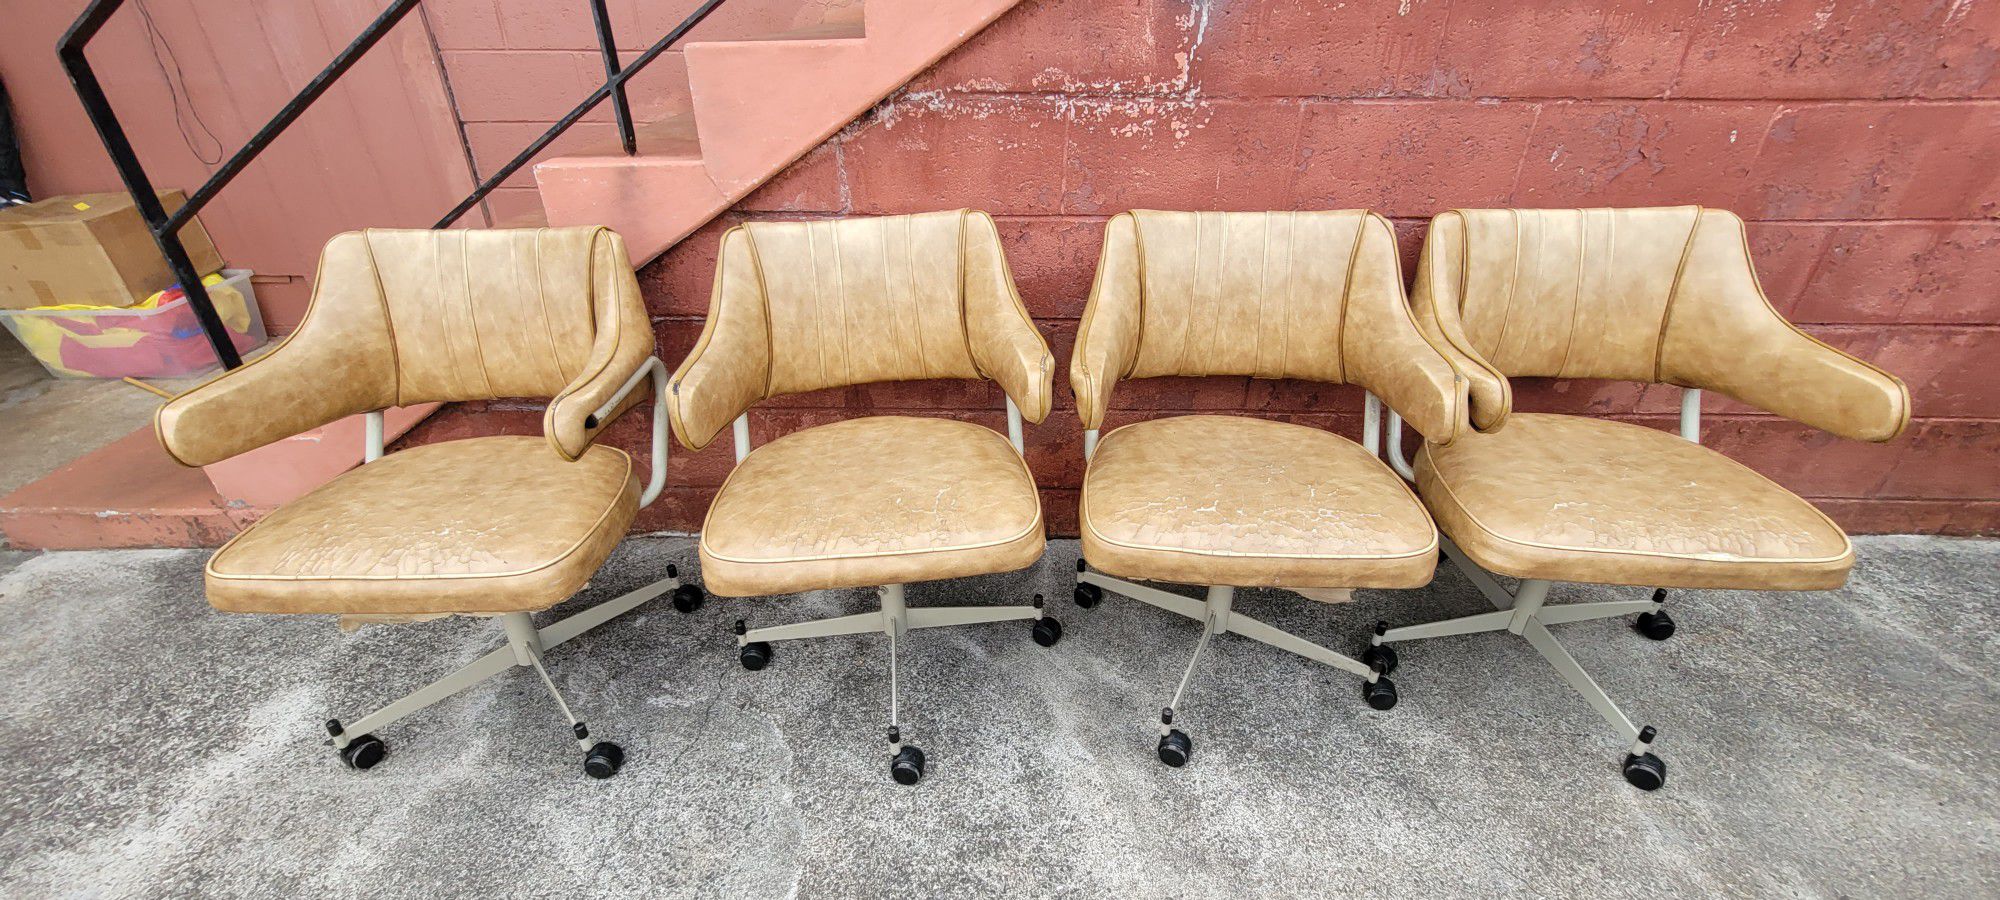 1970's Chairs